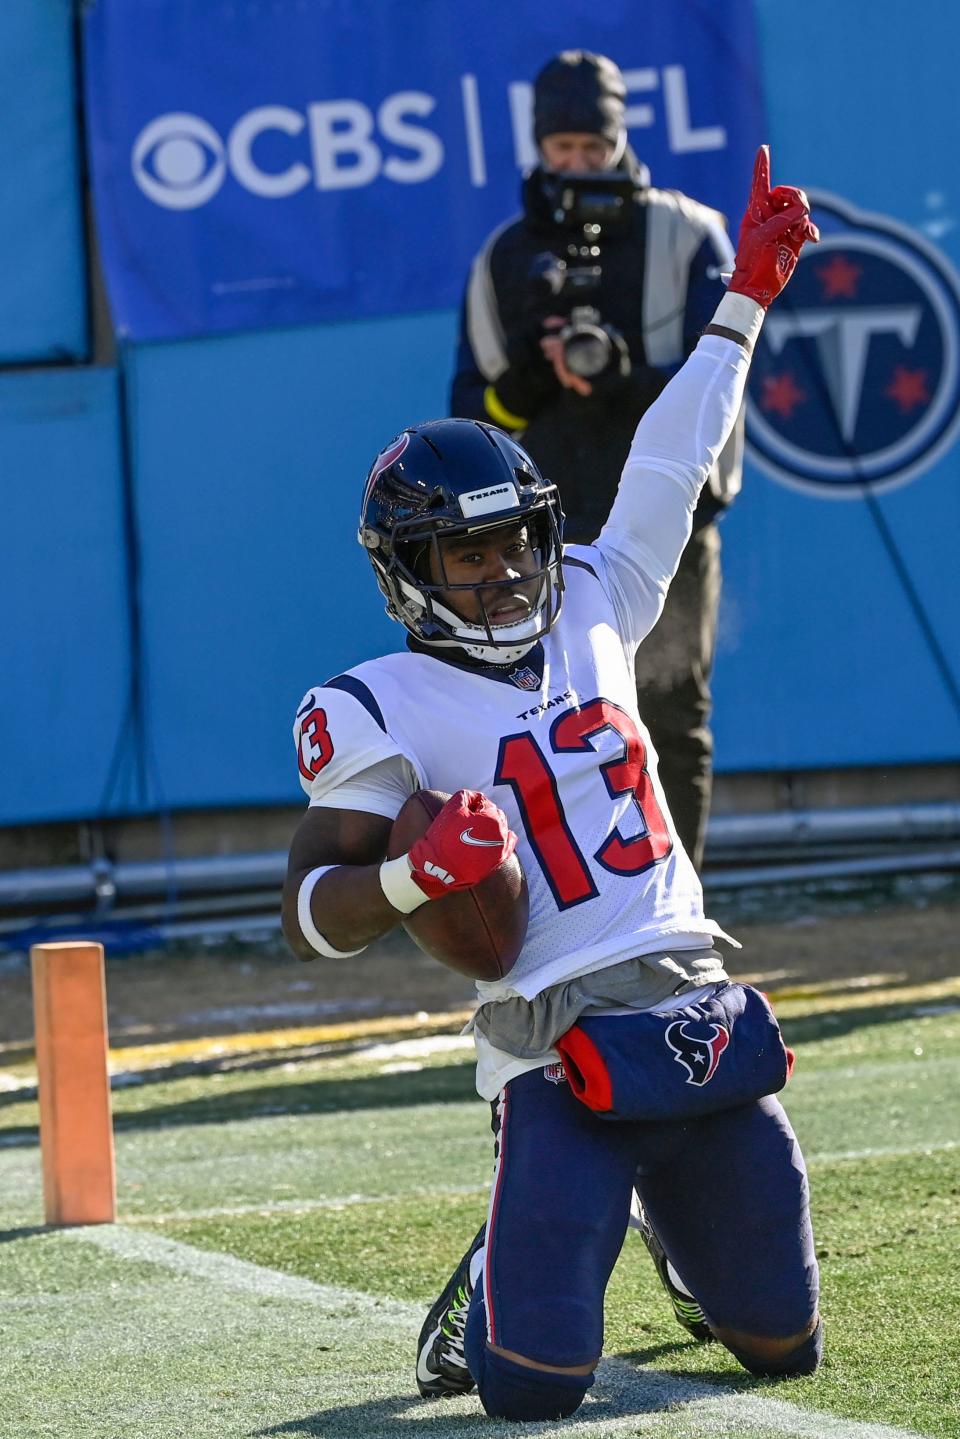 Will Brandin Cooks and the Houston Texans beat the Jacksonville Jaguars in NFL Week 17?